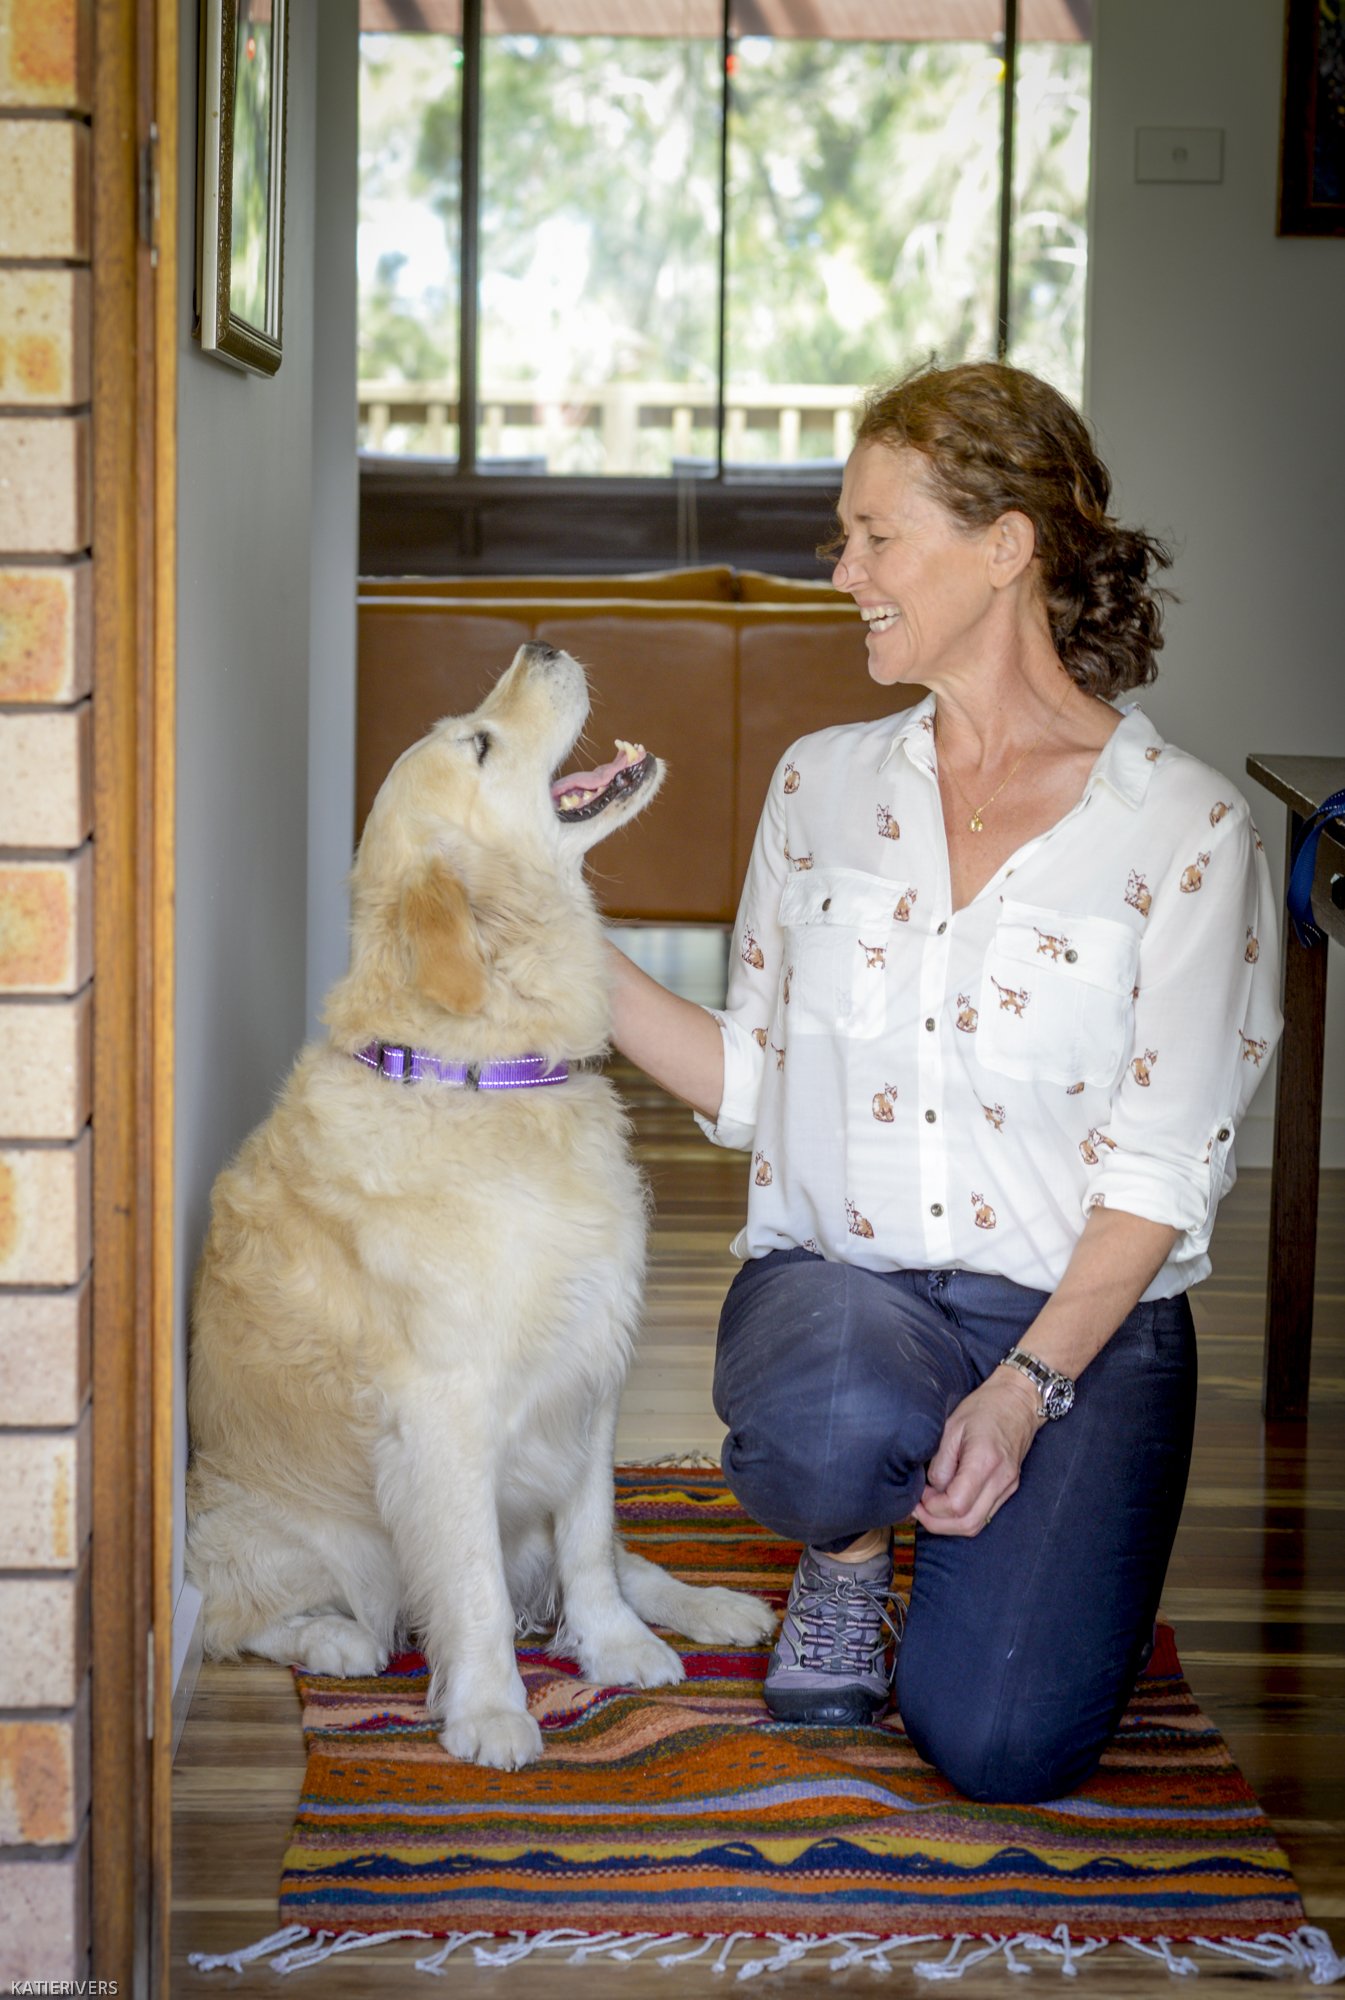 Dr. Glynis Kuipers is an experienced vet and animal carer, living and working on the South Coast of New South Wales.